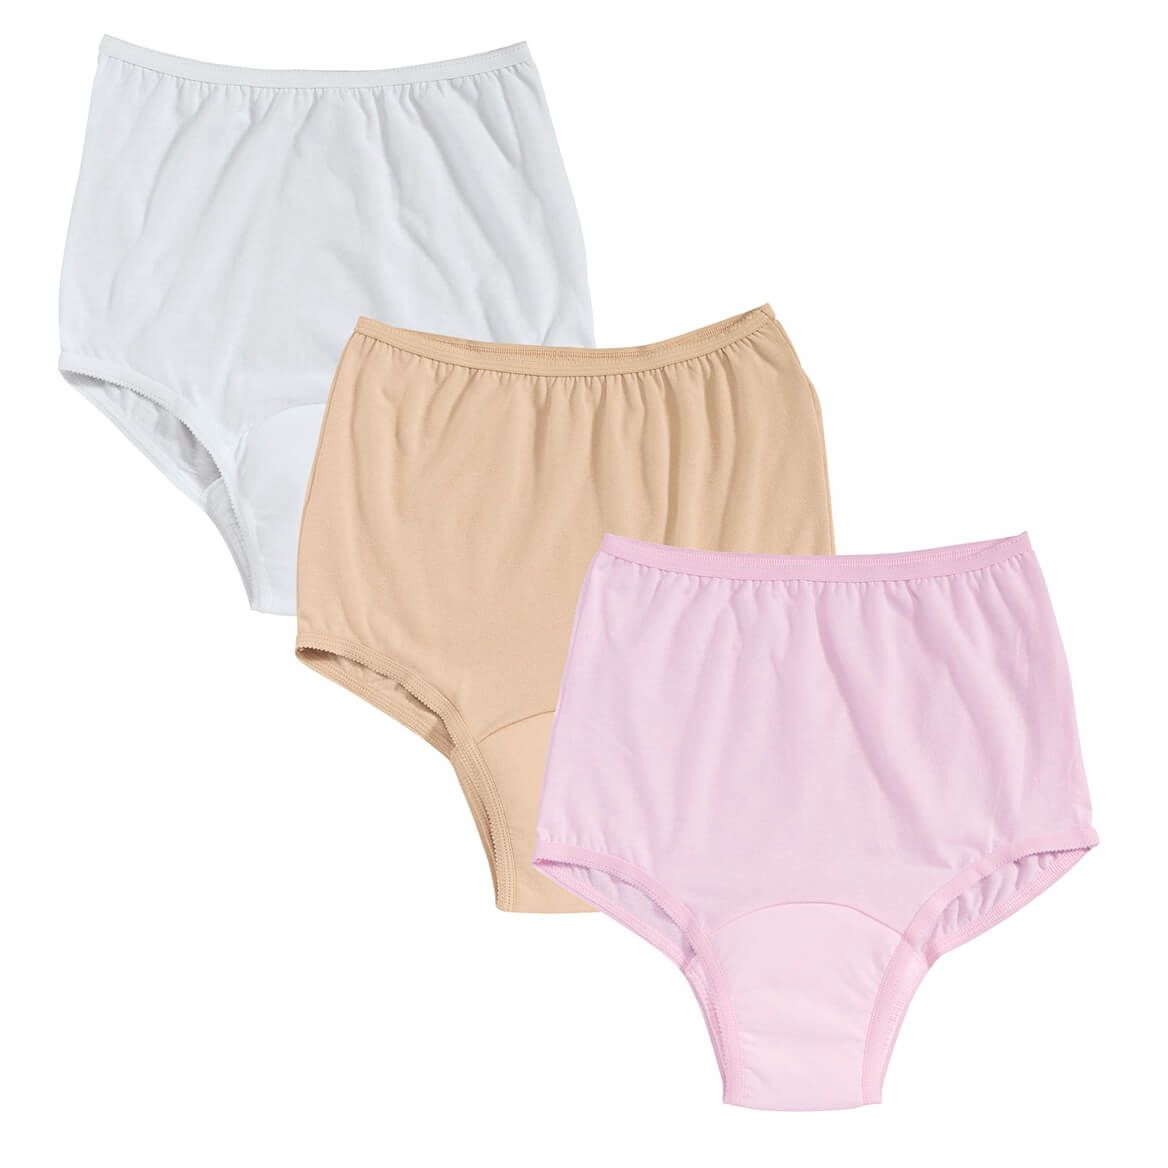 Colored Incontinence Panties - Pack Of 3 + '-' + 335704